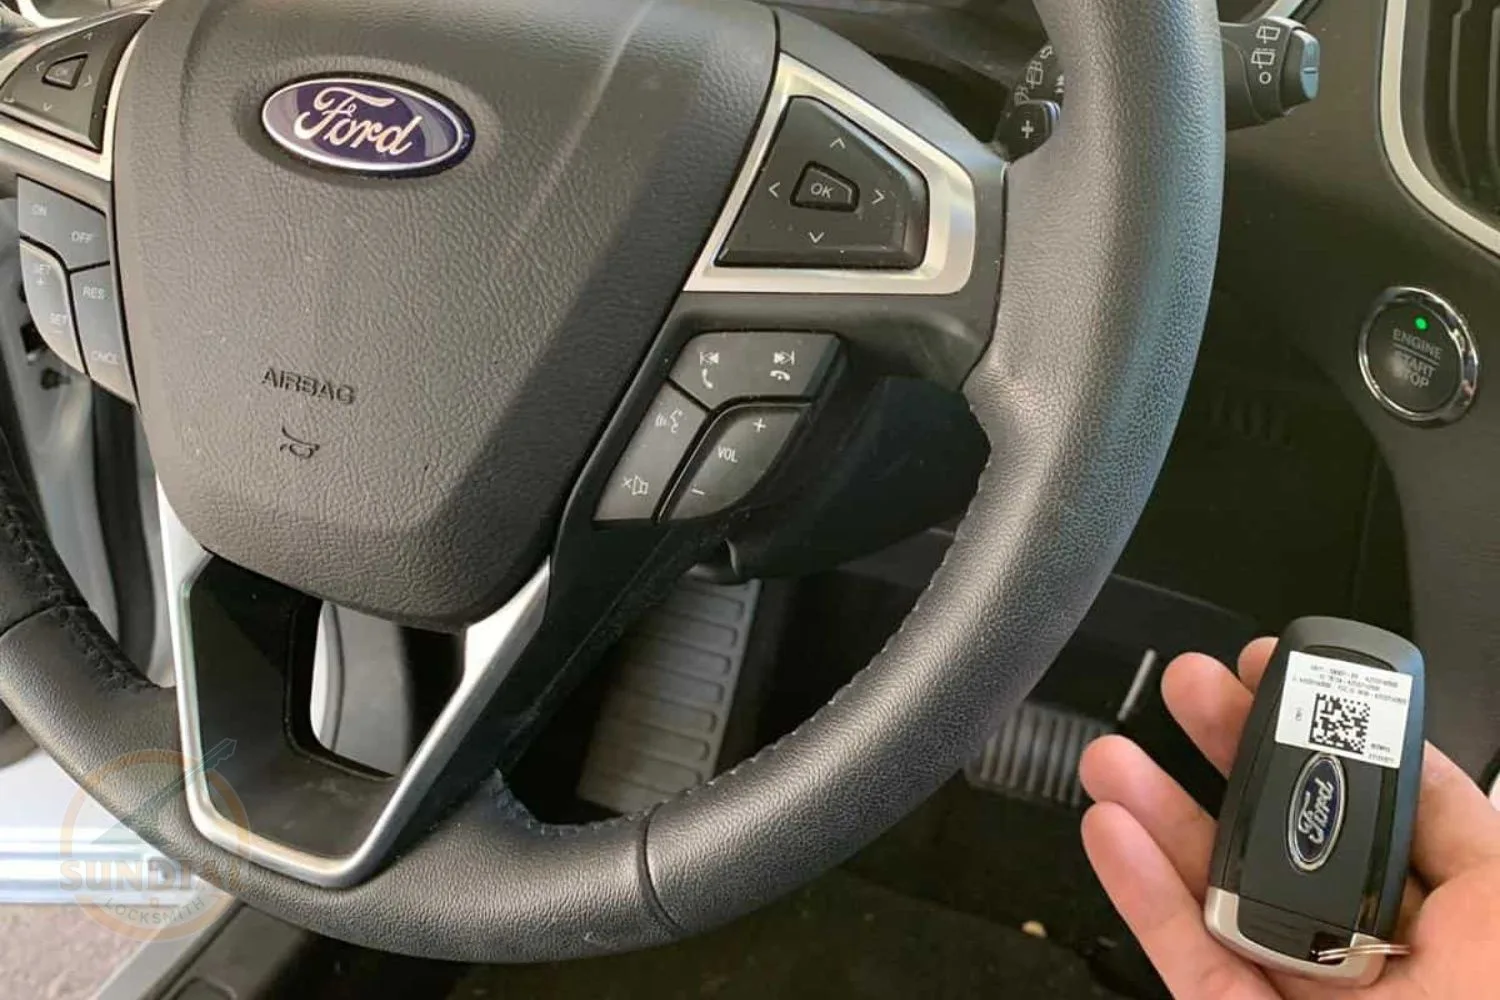 A hand holding a Ford car key fob with a QR code in front of a Ford vehicle's steering wheel with mounted controls.